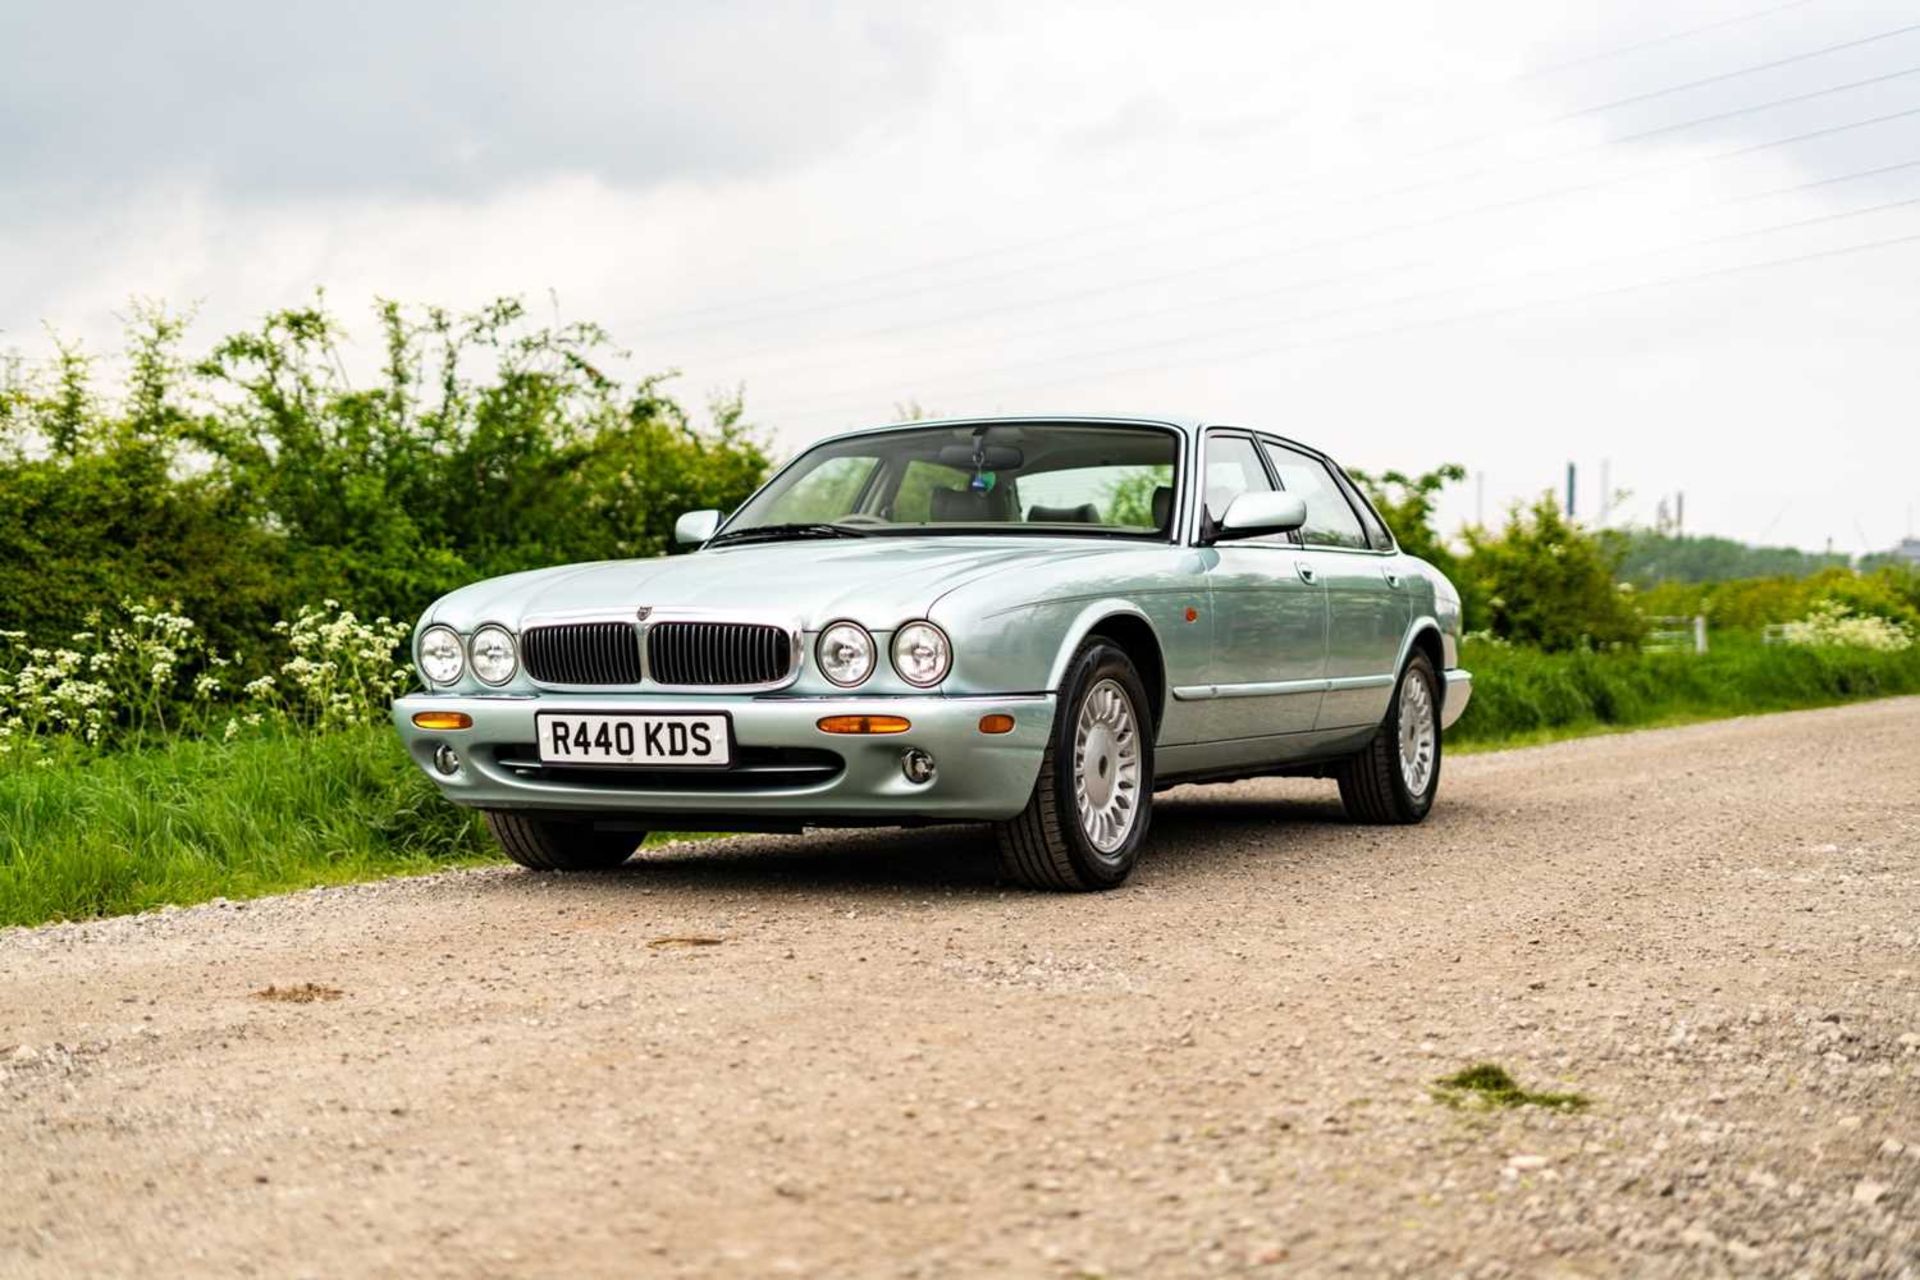 1998 Jaguar XJ8 ***NO RESERVE*** Just 40,000 miles from new and 1 owner from new - Image 7 of 58